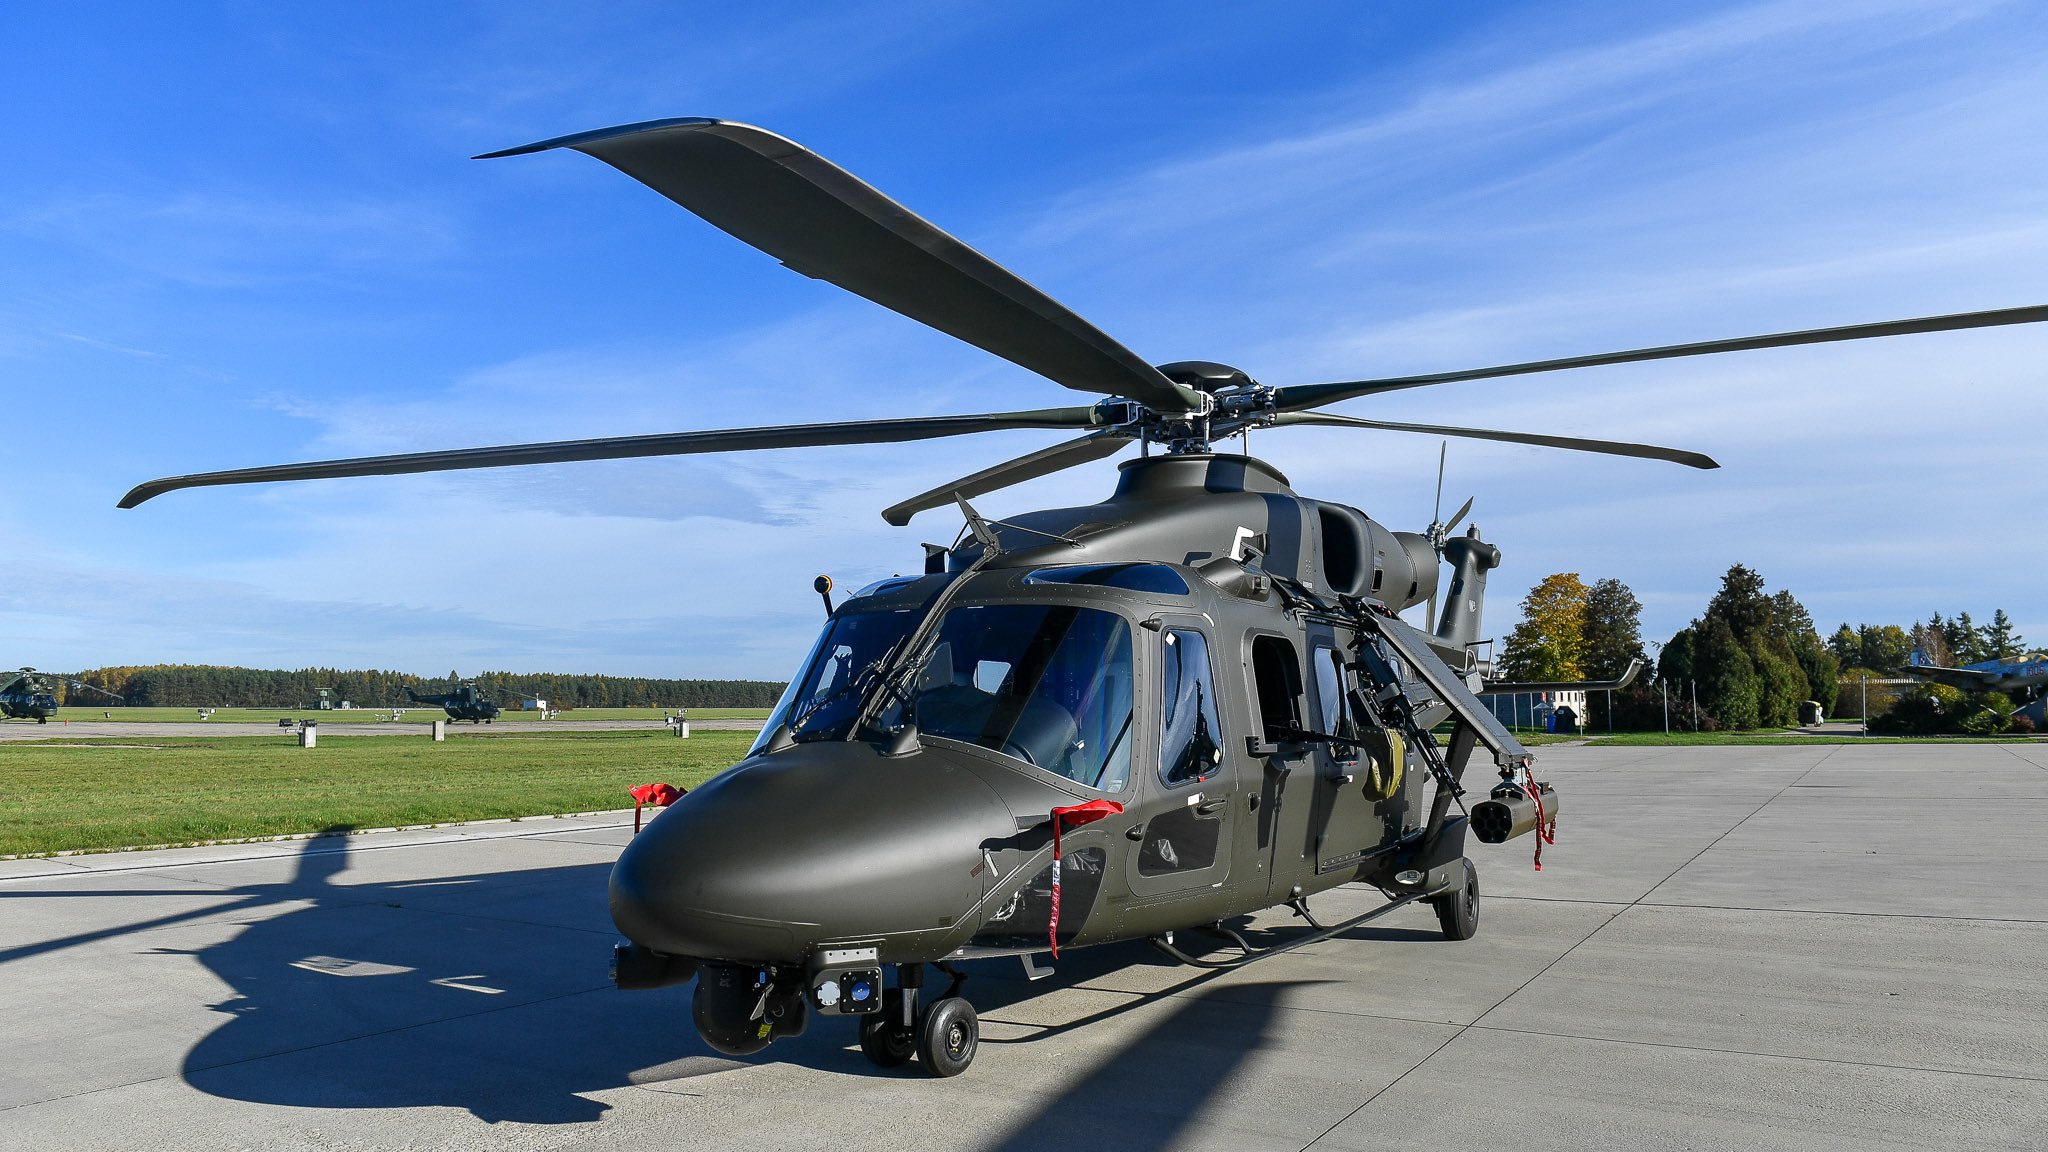 AW-149 multi-role helicopter